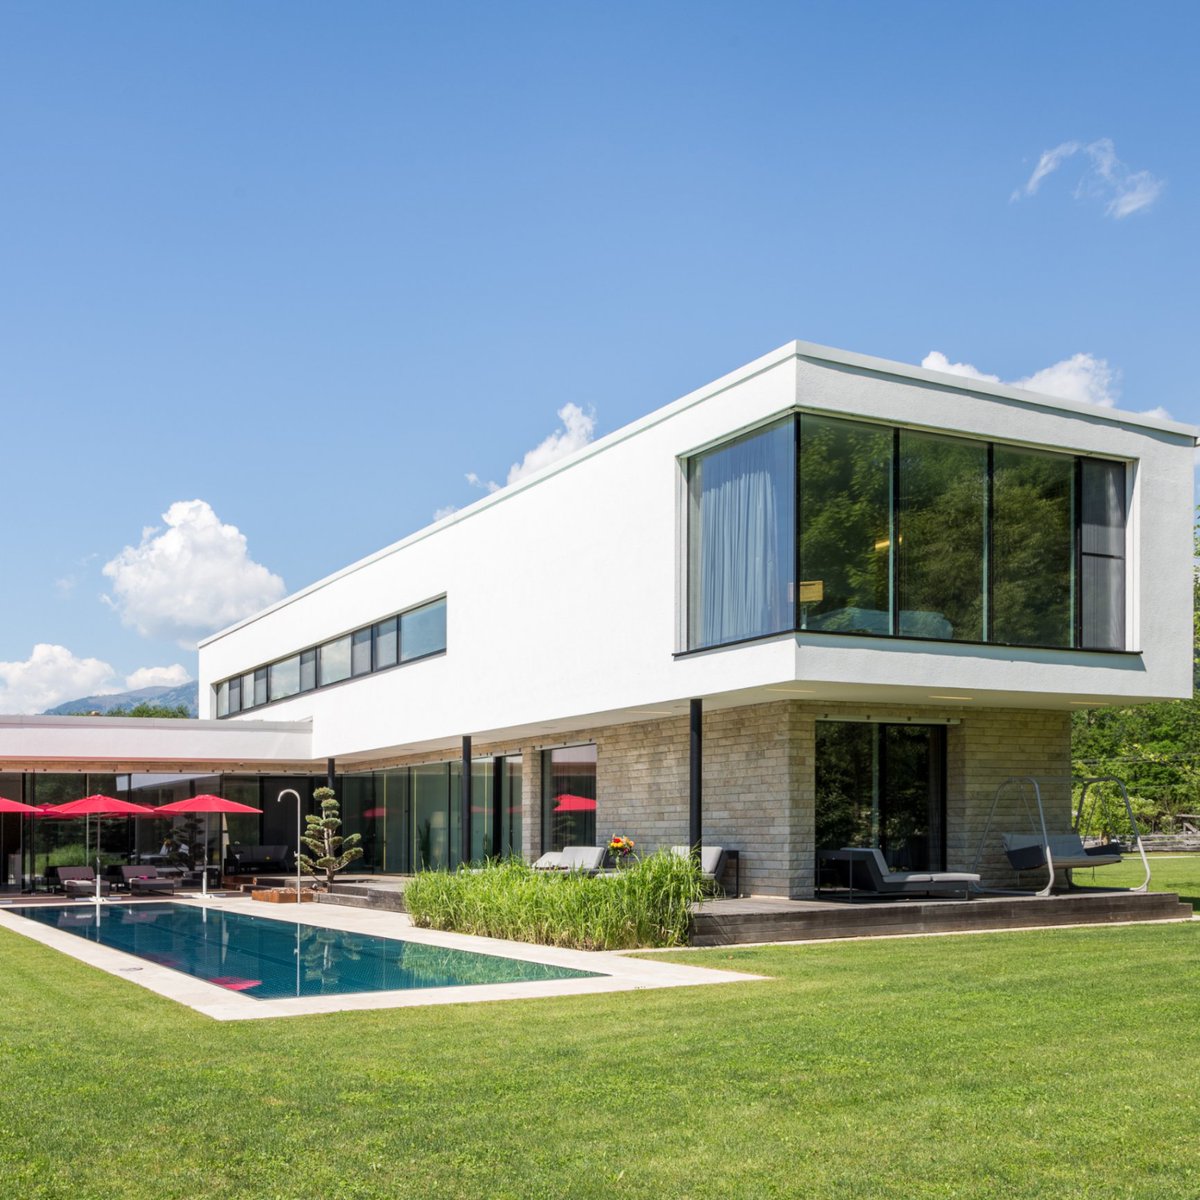 Discover the modern Bauhaus villa from 2014 in the heart of Carinthia! 🏡 

For more information about this outstanding Property of the Week example, follow the link: spkl.io/60124F3v8

#engelvoelkers #finestrealestate #luxuryliving #potw